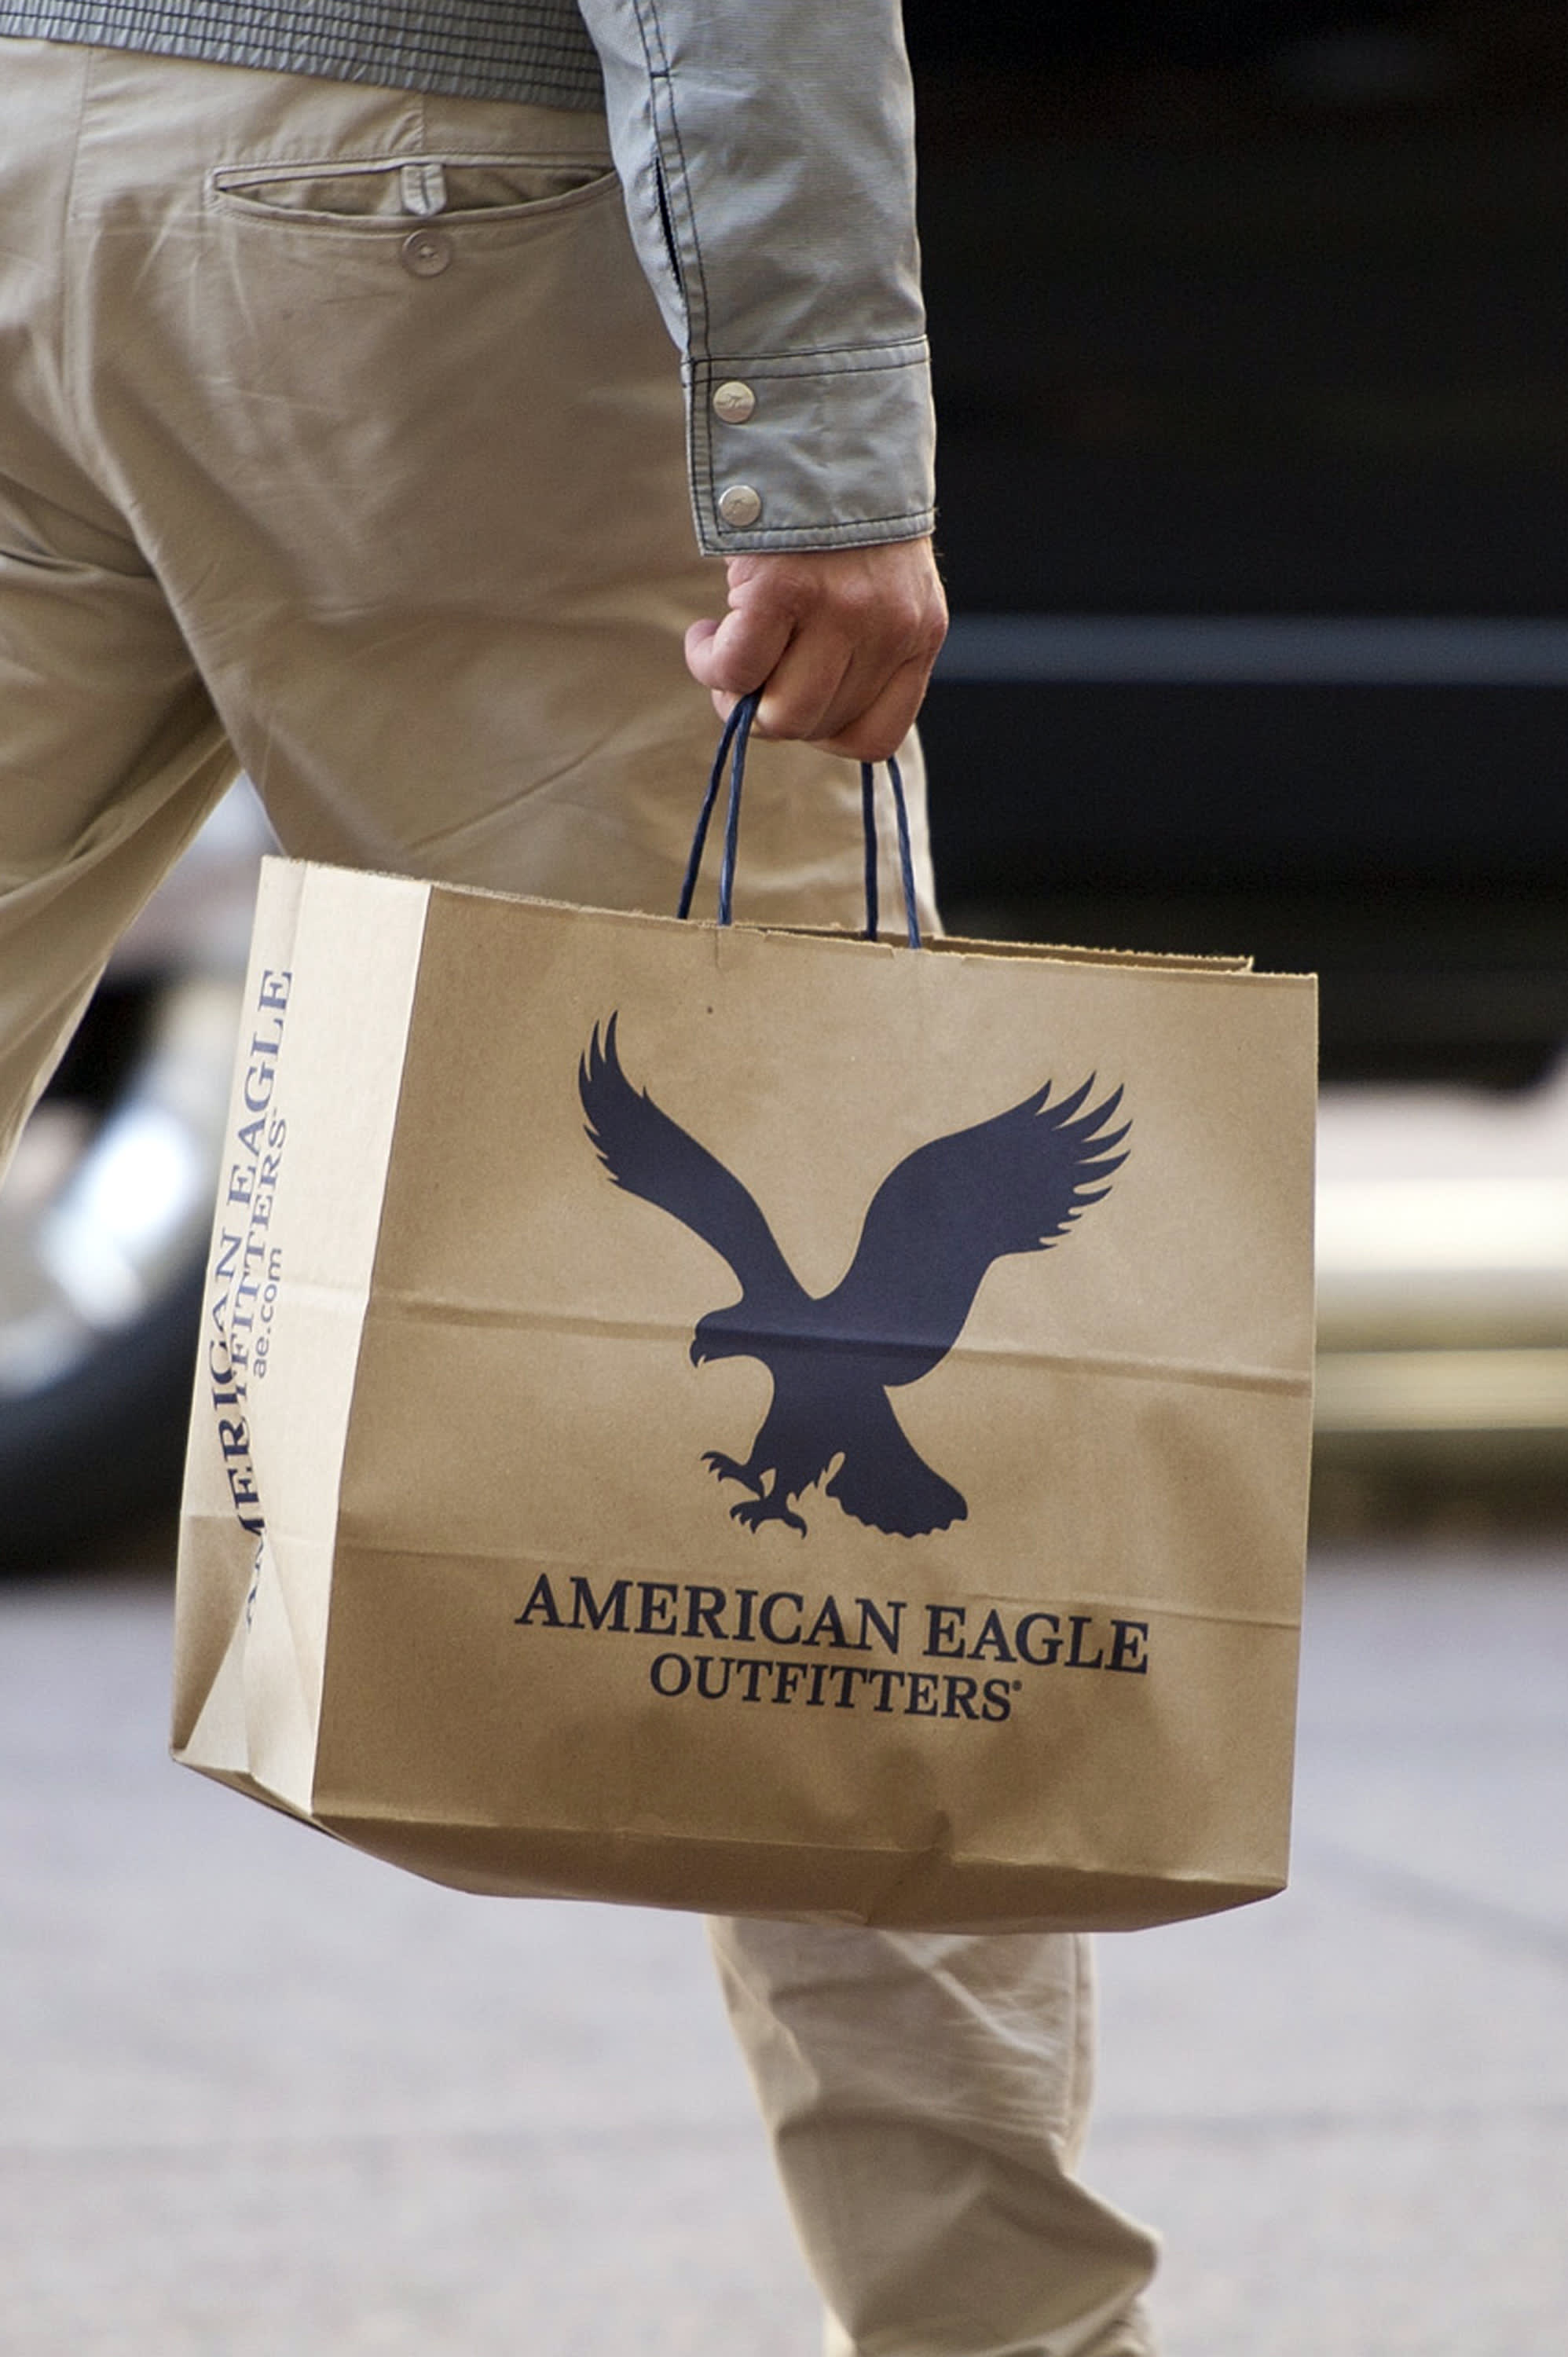 American Eagle Outfitters CEO sees ‘Roaring 20s’ -like tree after pandemic